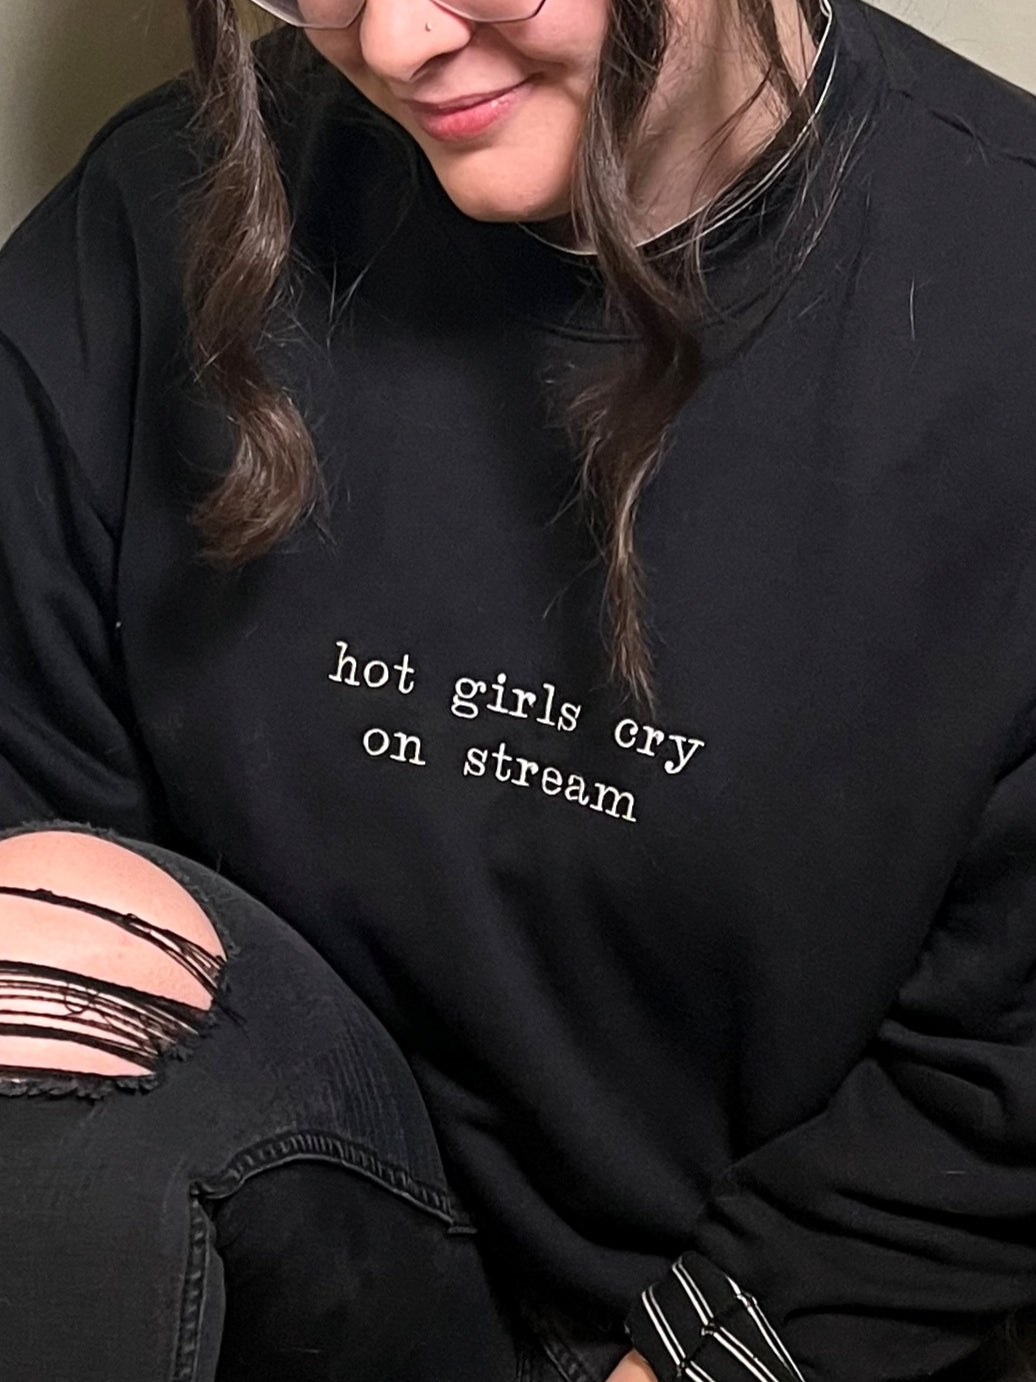 Close up picture of Ariel wearing a black crew neck with "hot girls cry on stream" embroidered on the front.